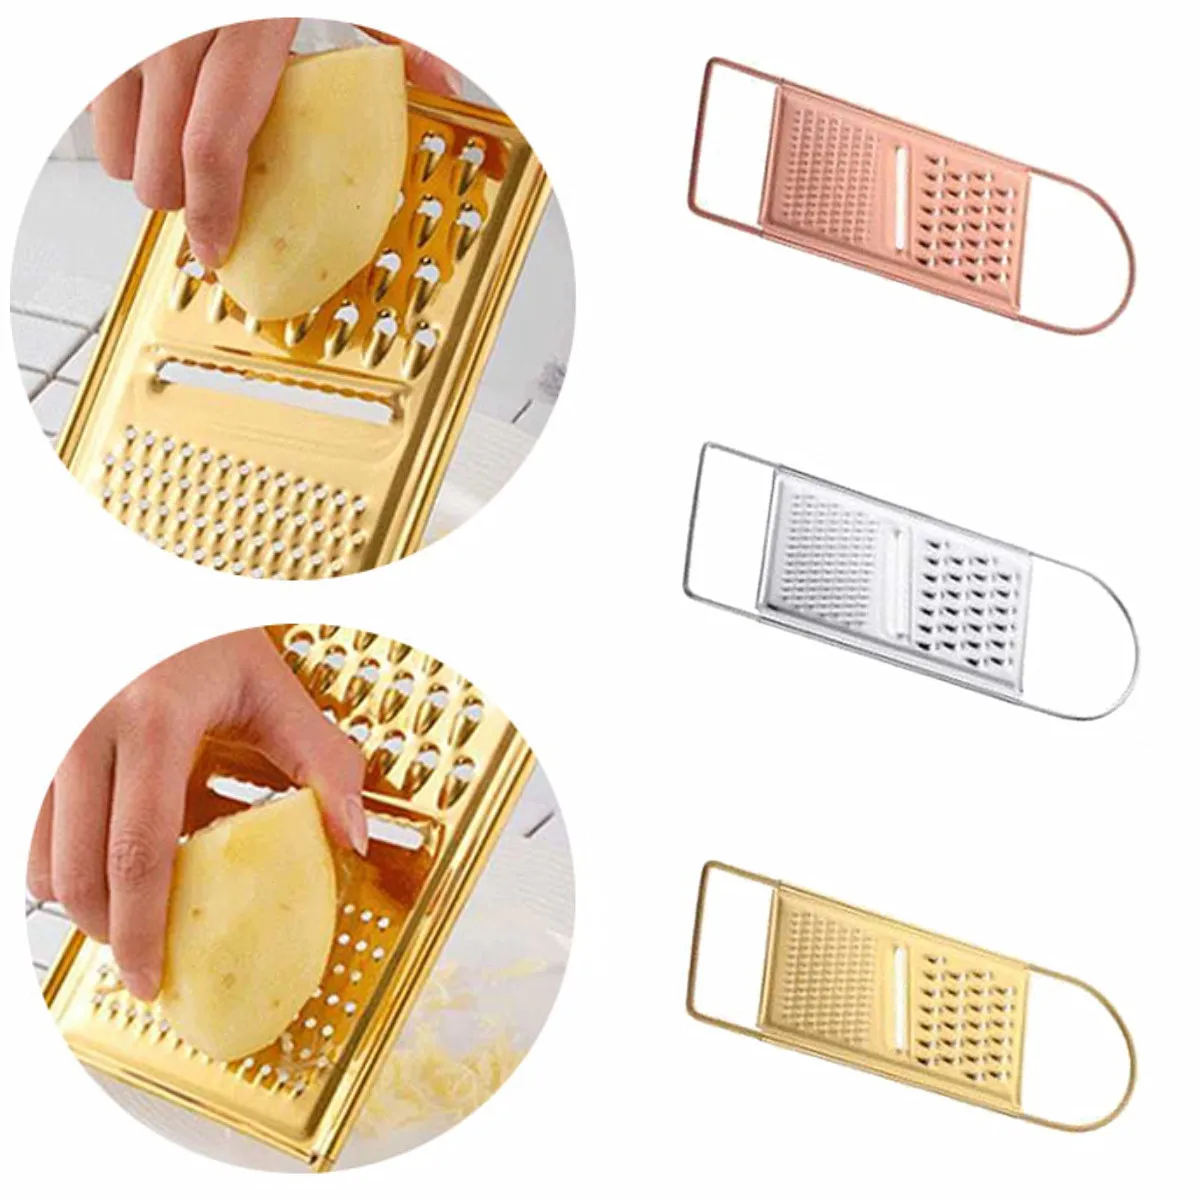 

Gold Stainless Steel Grater Kitchen Vegetable Fruit Slicer Potato Peel Scrape Chopper Cutter Salad Processors Tools Cooking Tool